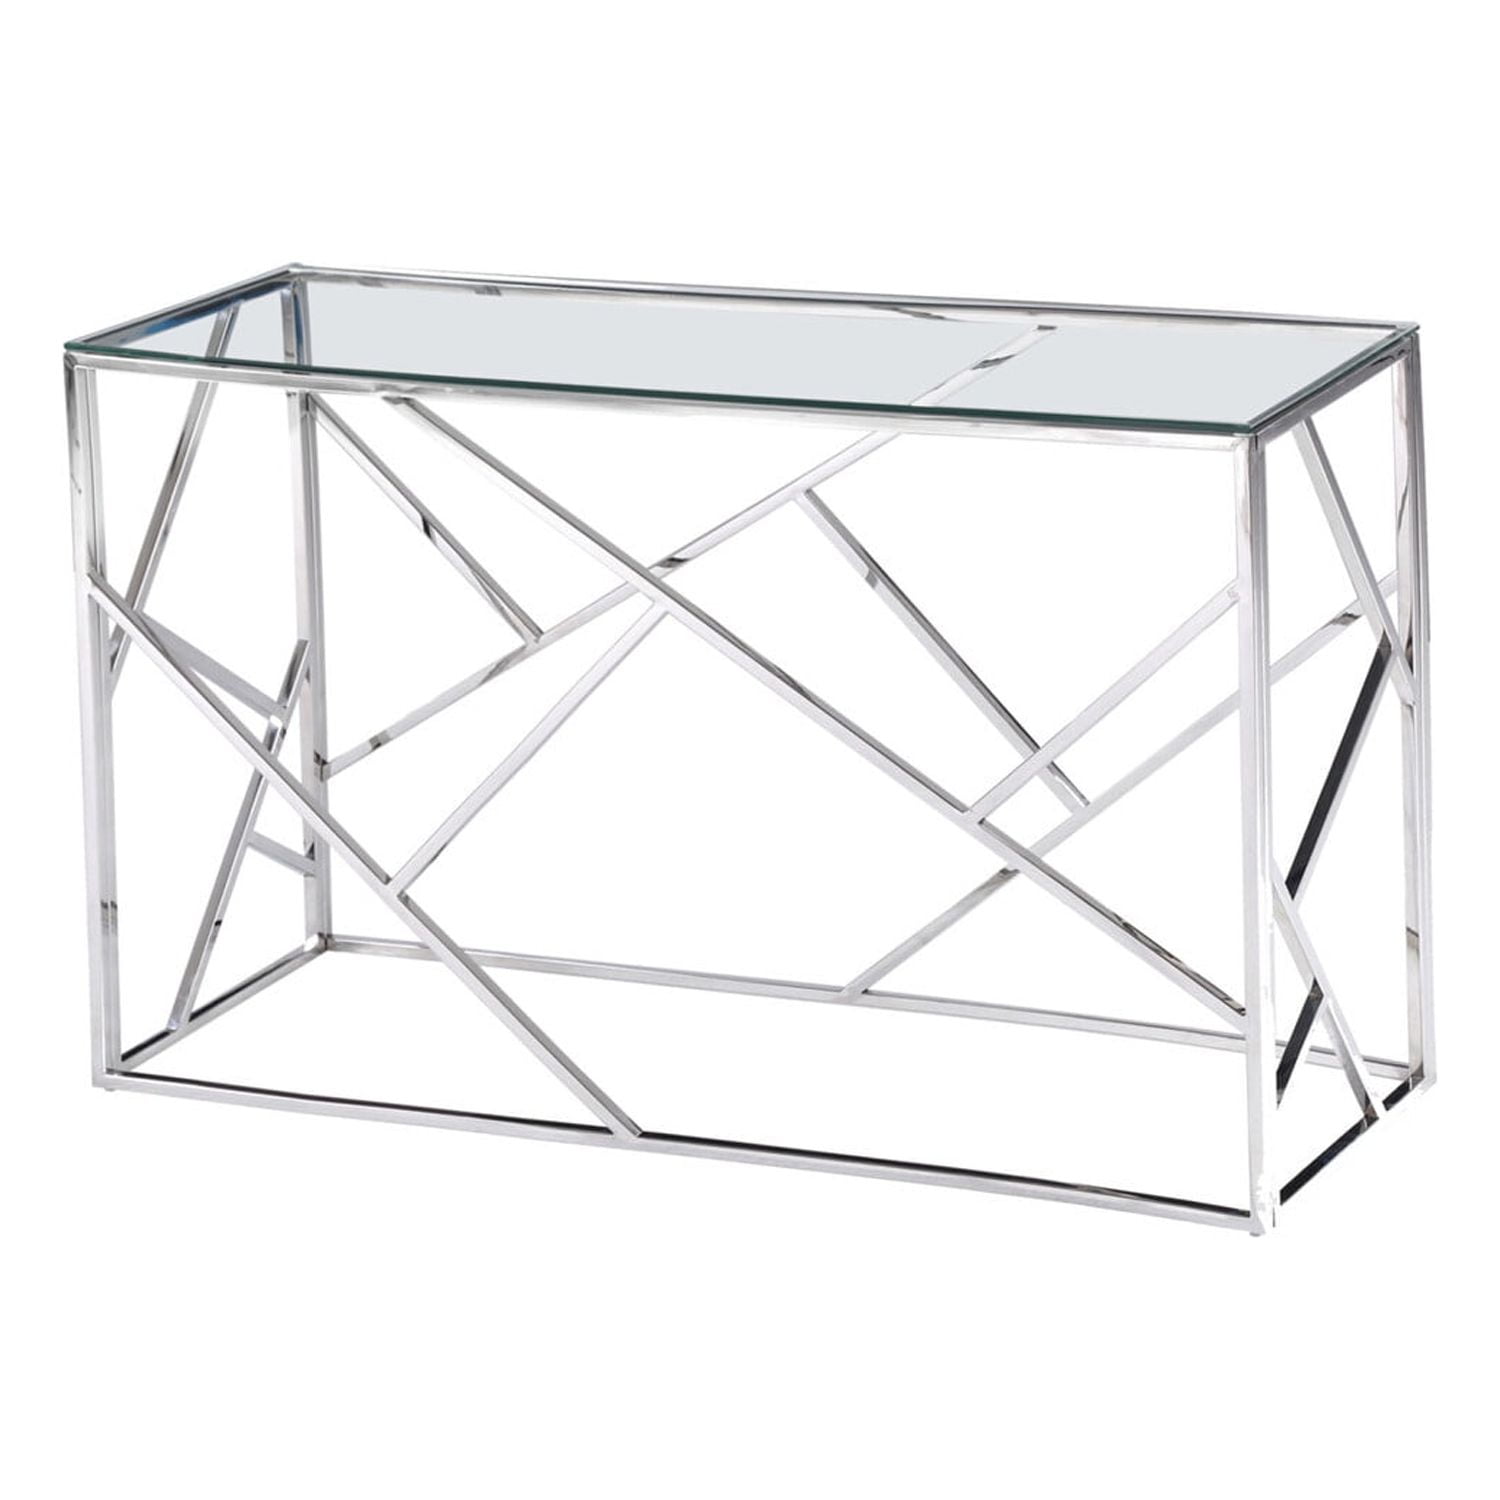 E26 Silver Sofa Table Stainless Steel Living Room Silver Sofa Table